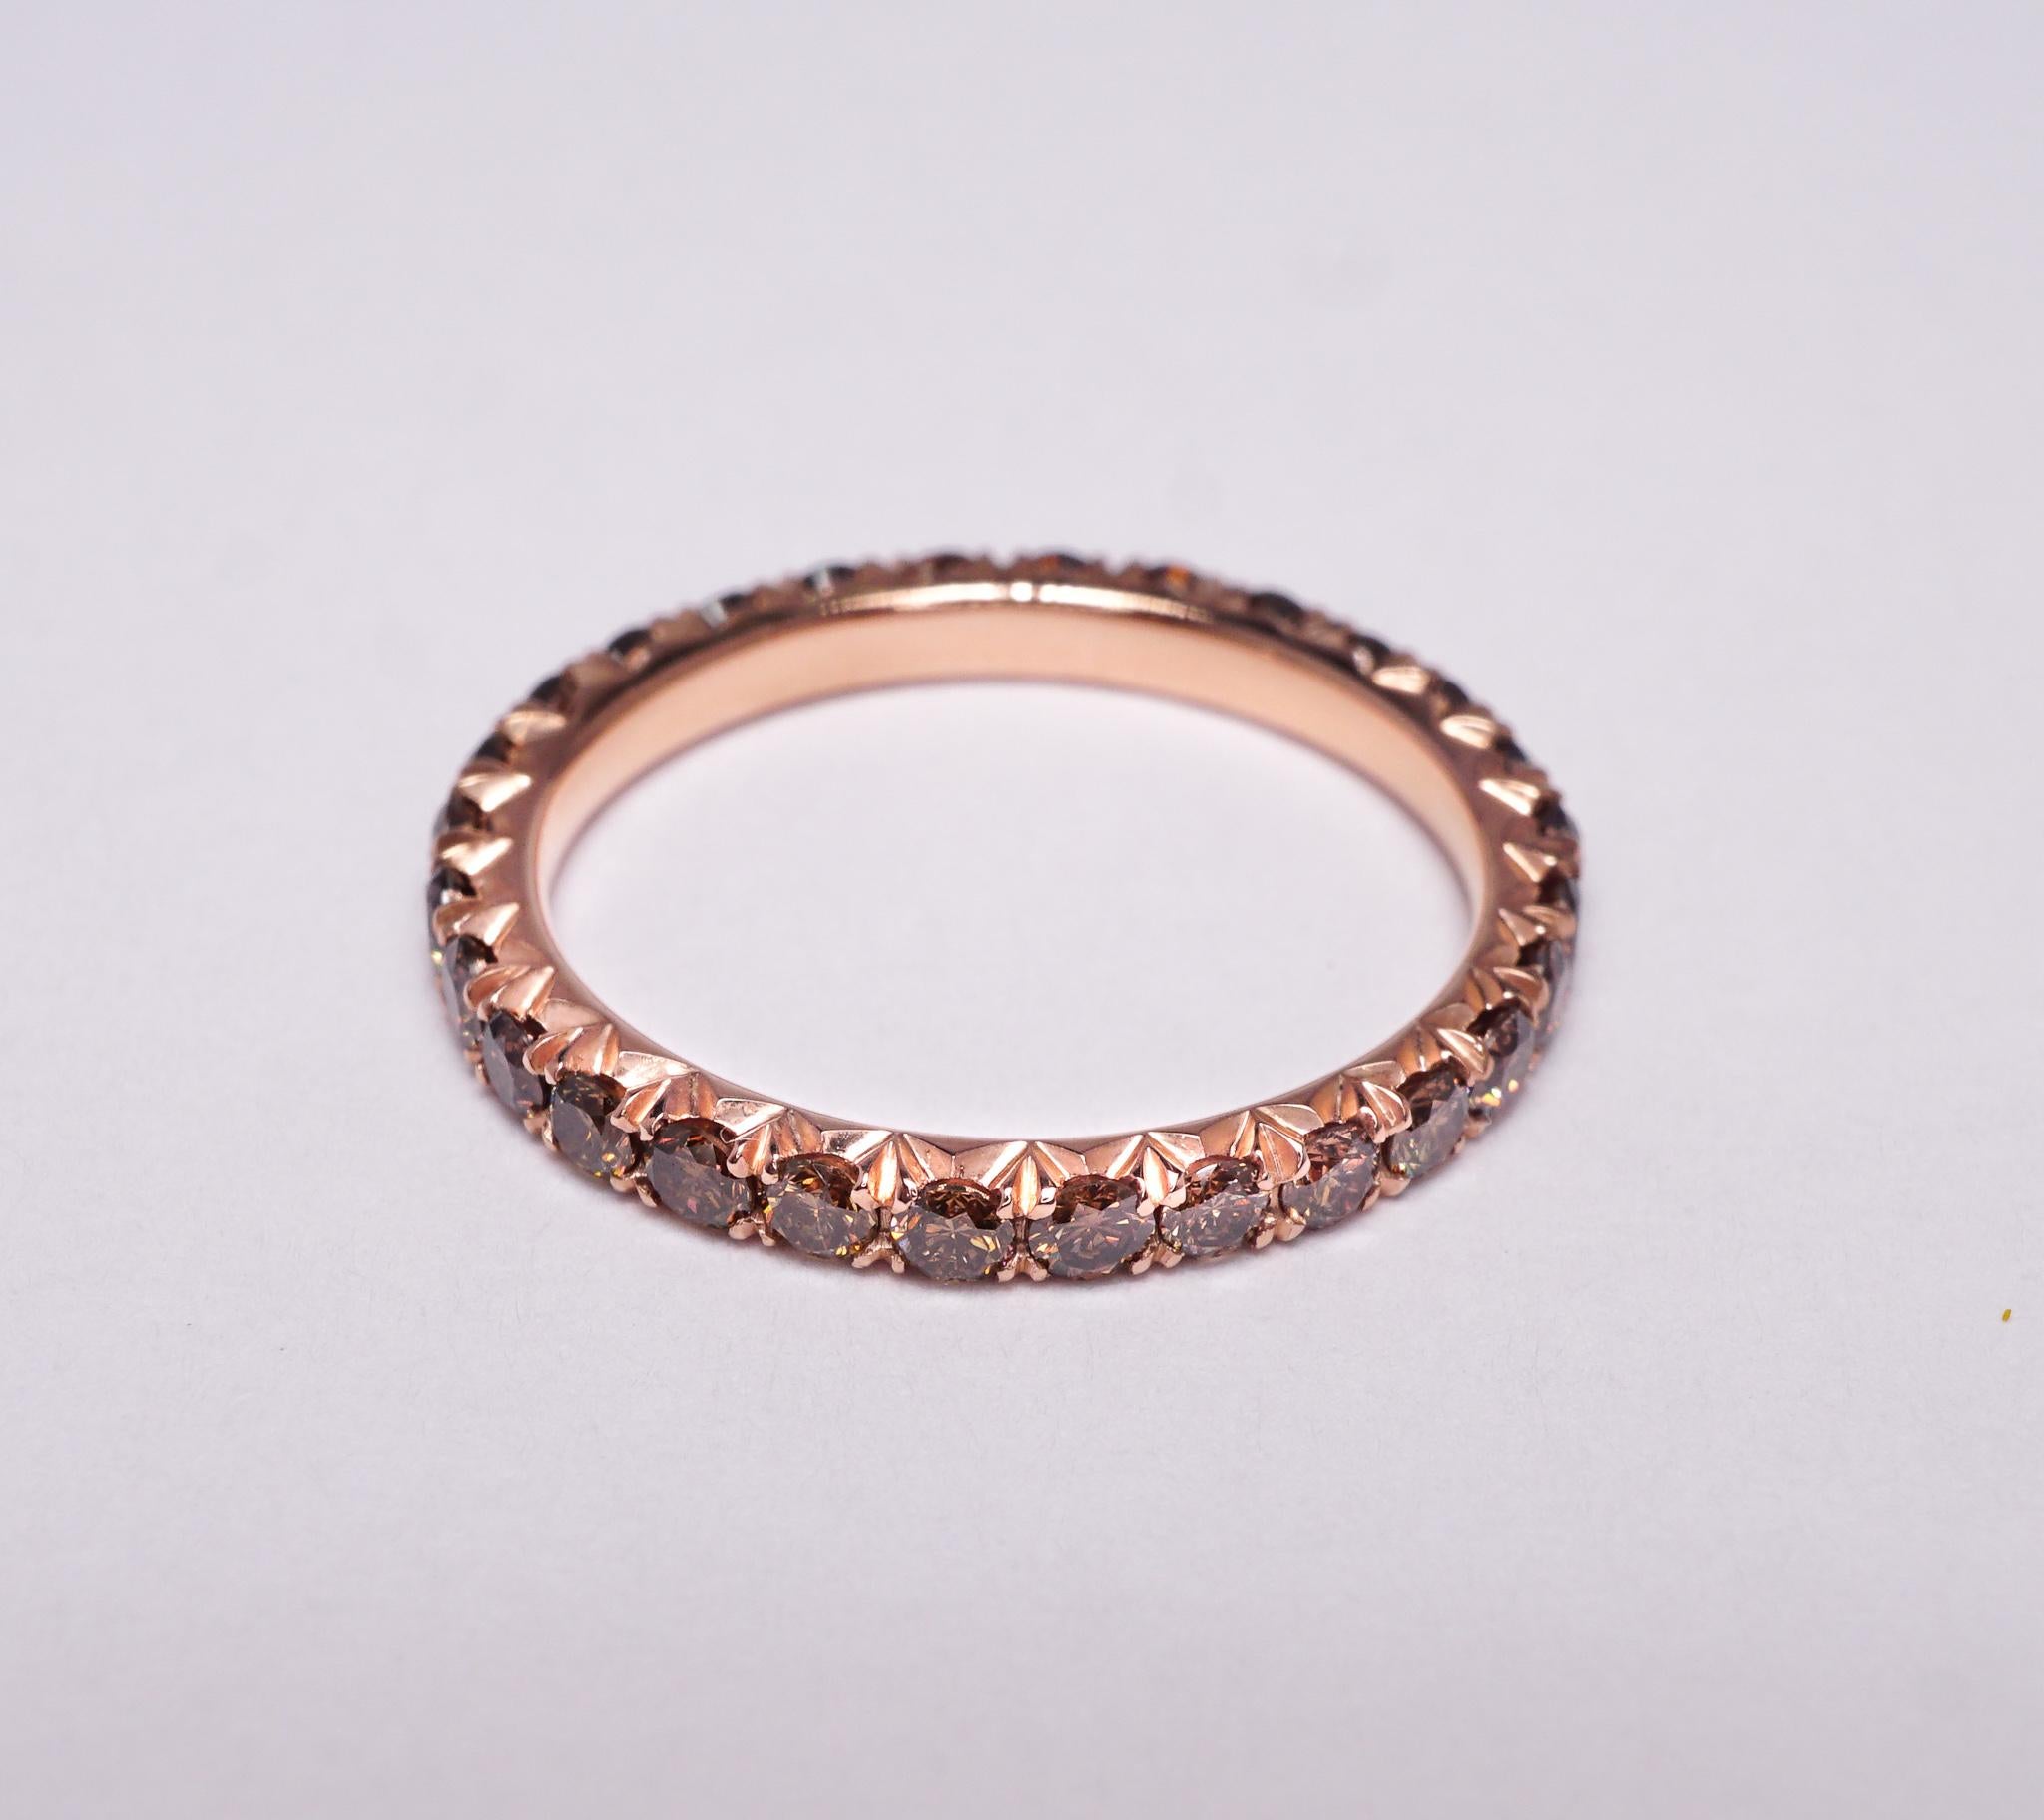 Diamond eternity wedding band set in 14K Rose gold. Pave set Brilliant Round Diamonds are Natural Pinkish-Brown/Orangish-Brown VS1-SI1. Carat weight: 1.10 ct. Total ring weight: 2.30 grams. 
Ring size: 5.75. Can be sized upon request. This ring is